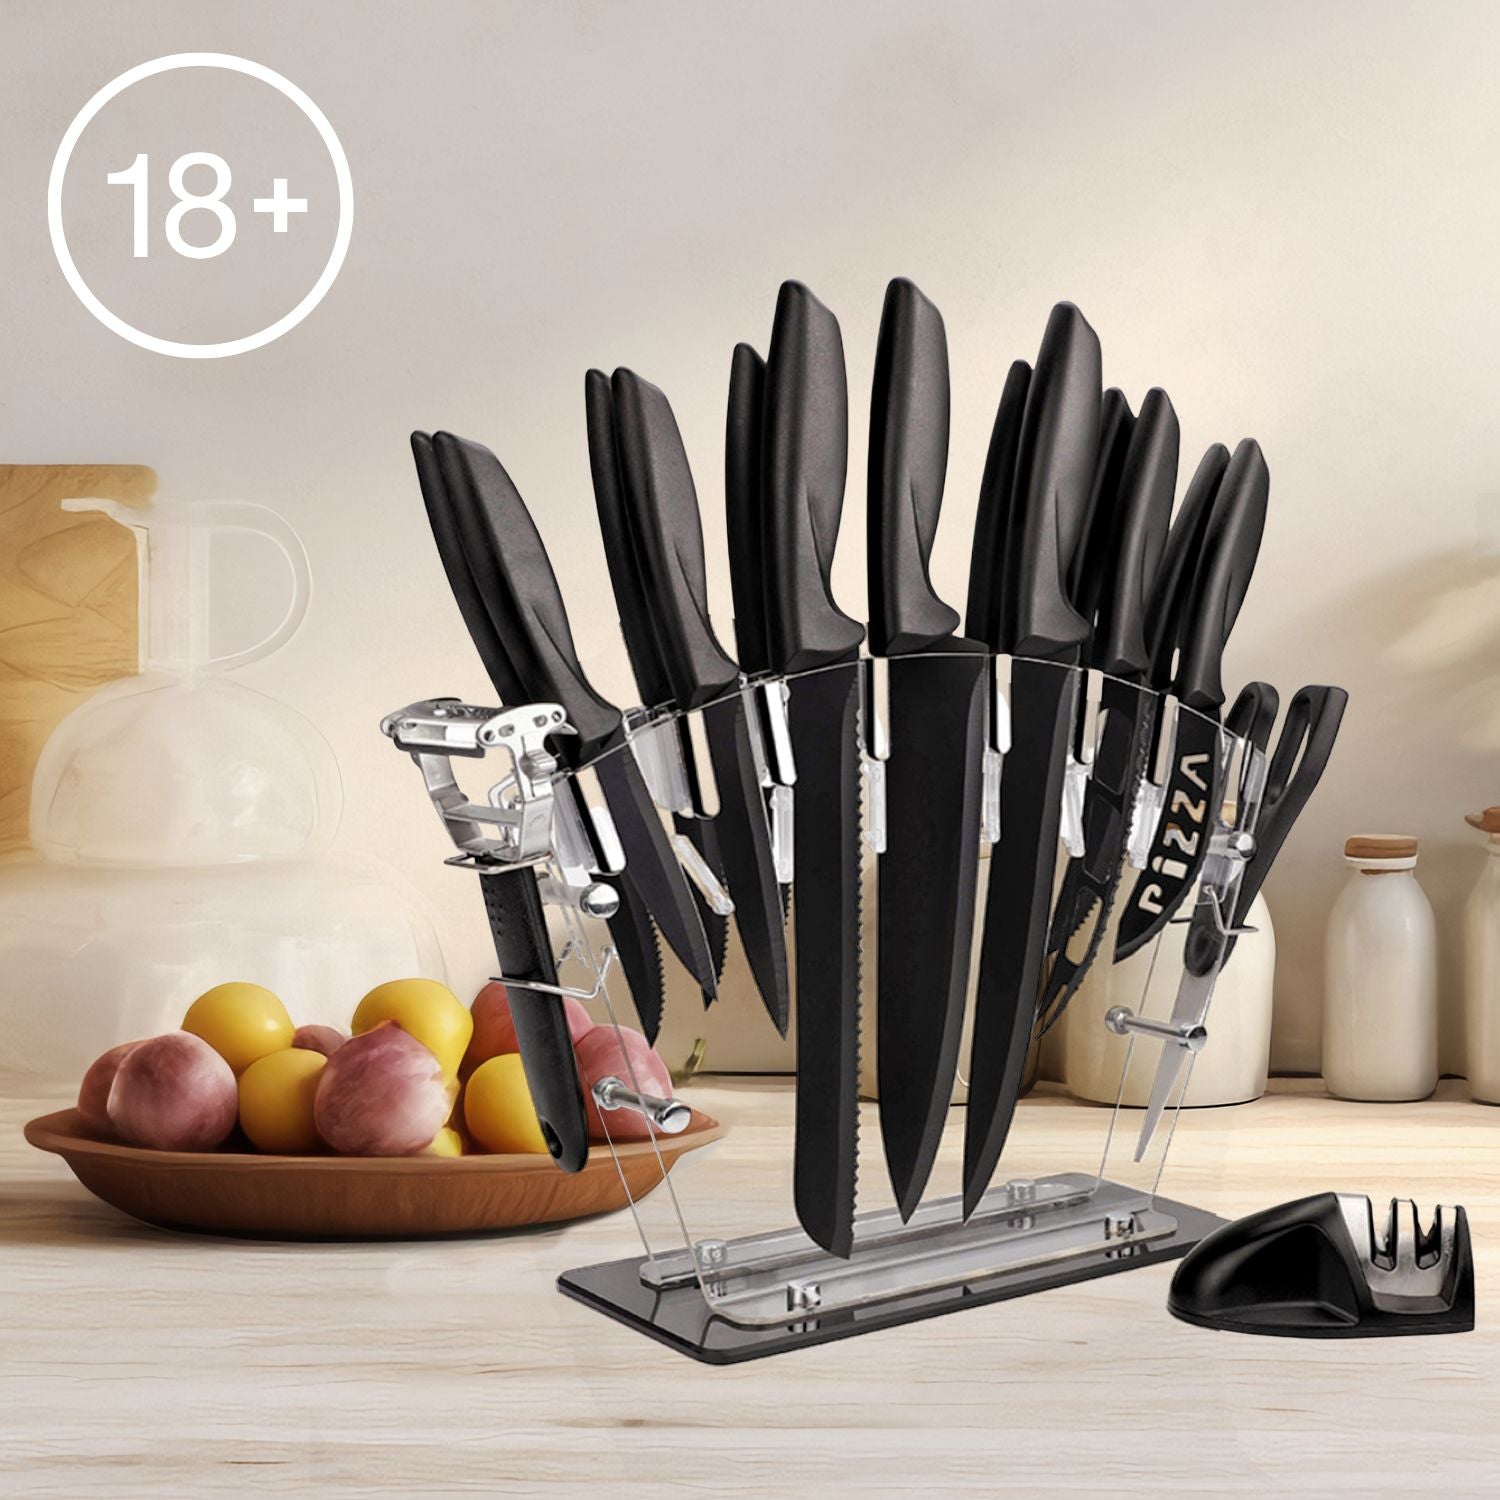 GOMINIMO 17 Piece Kitchen Knife Set with Acrylic Knife Block (Black and Transparent)